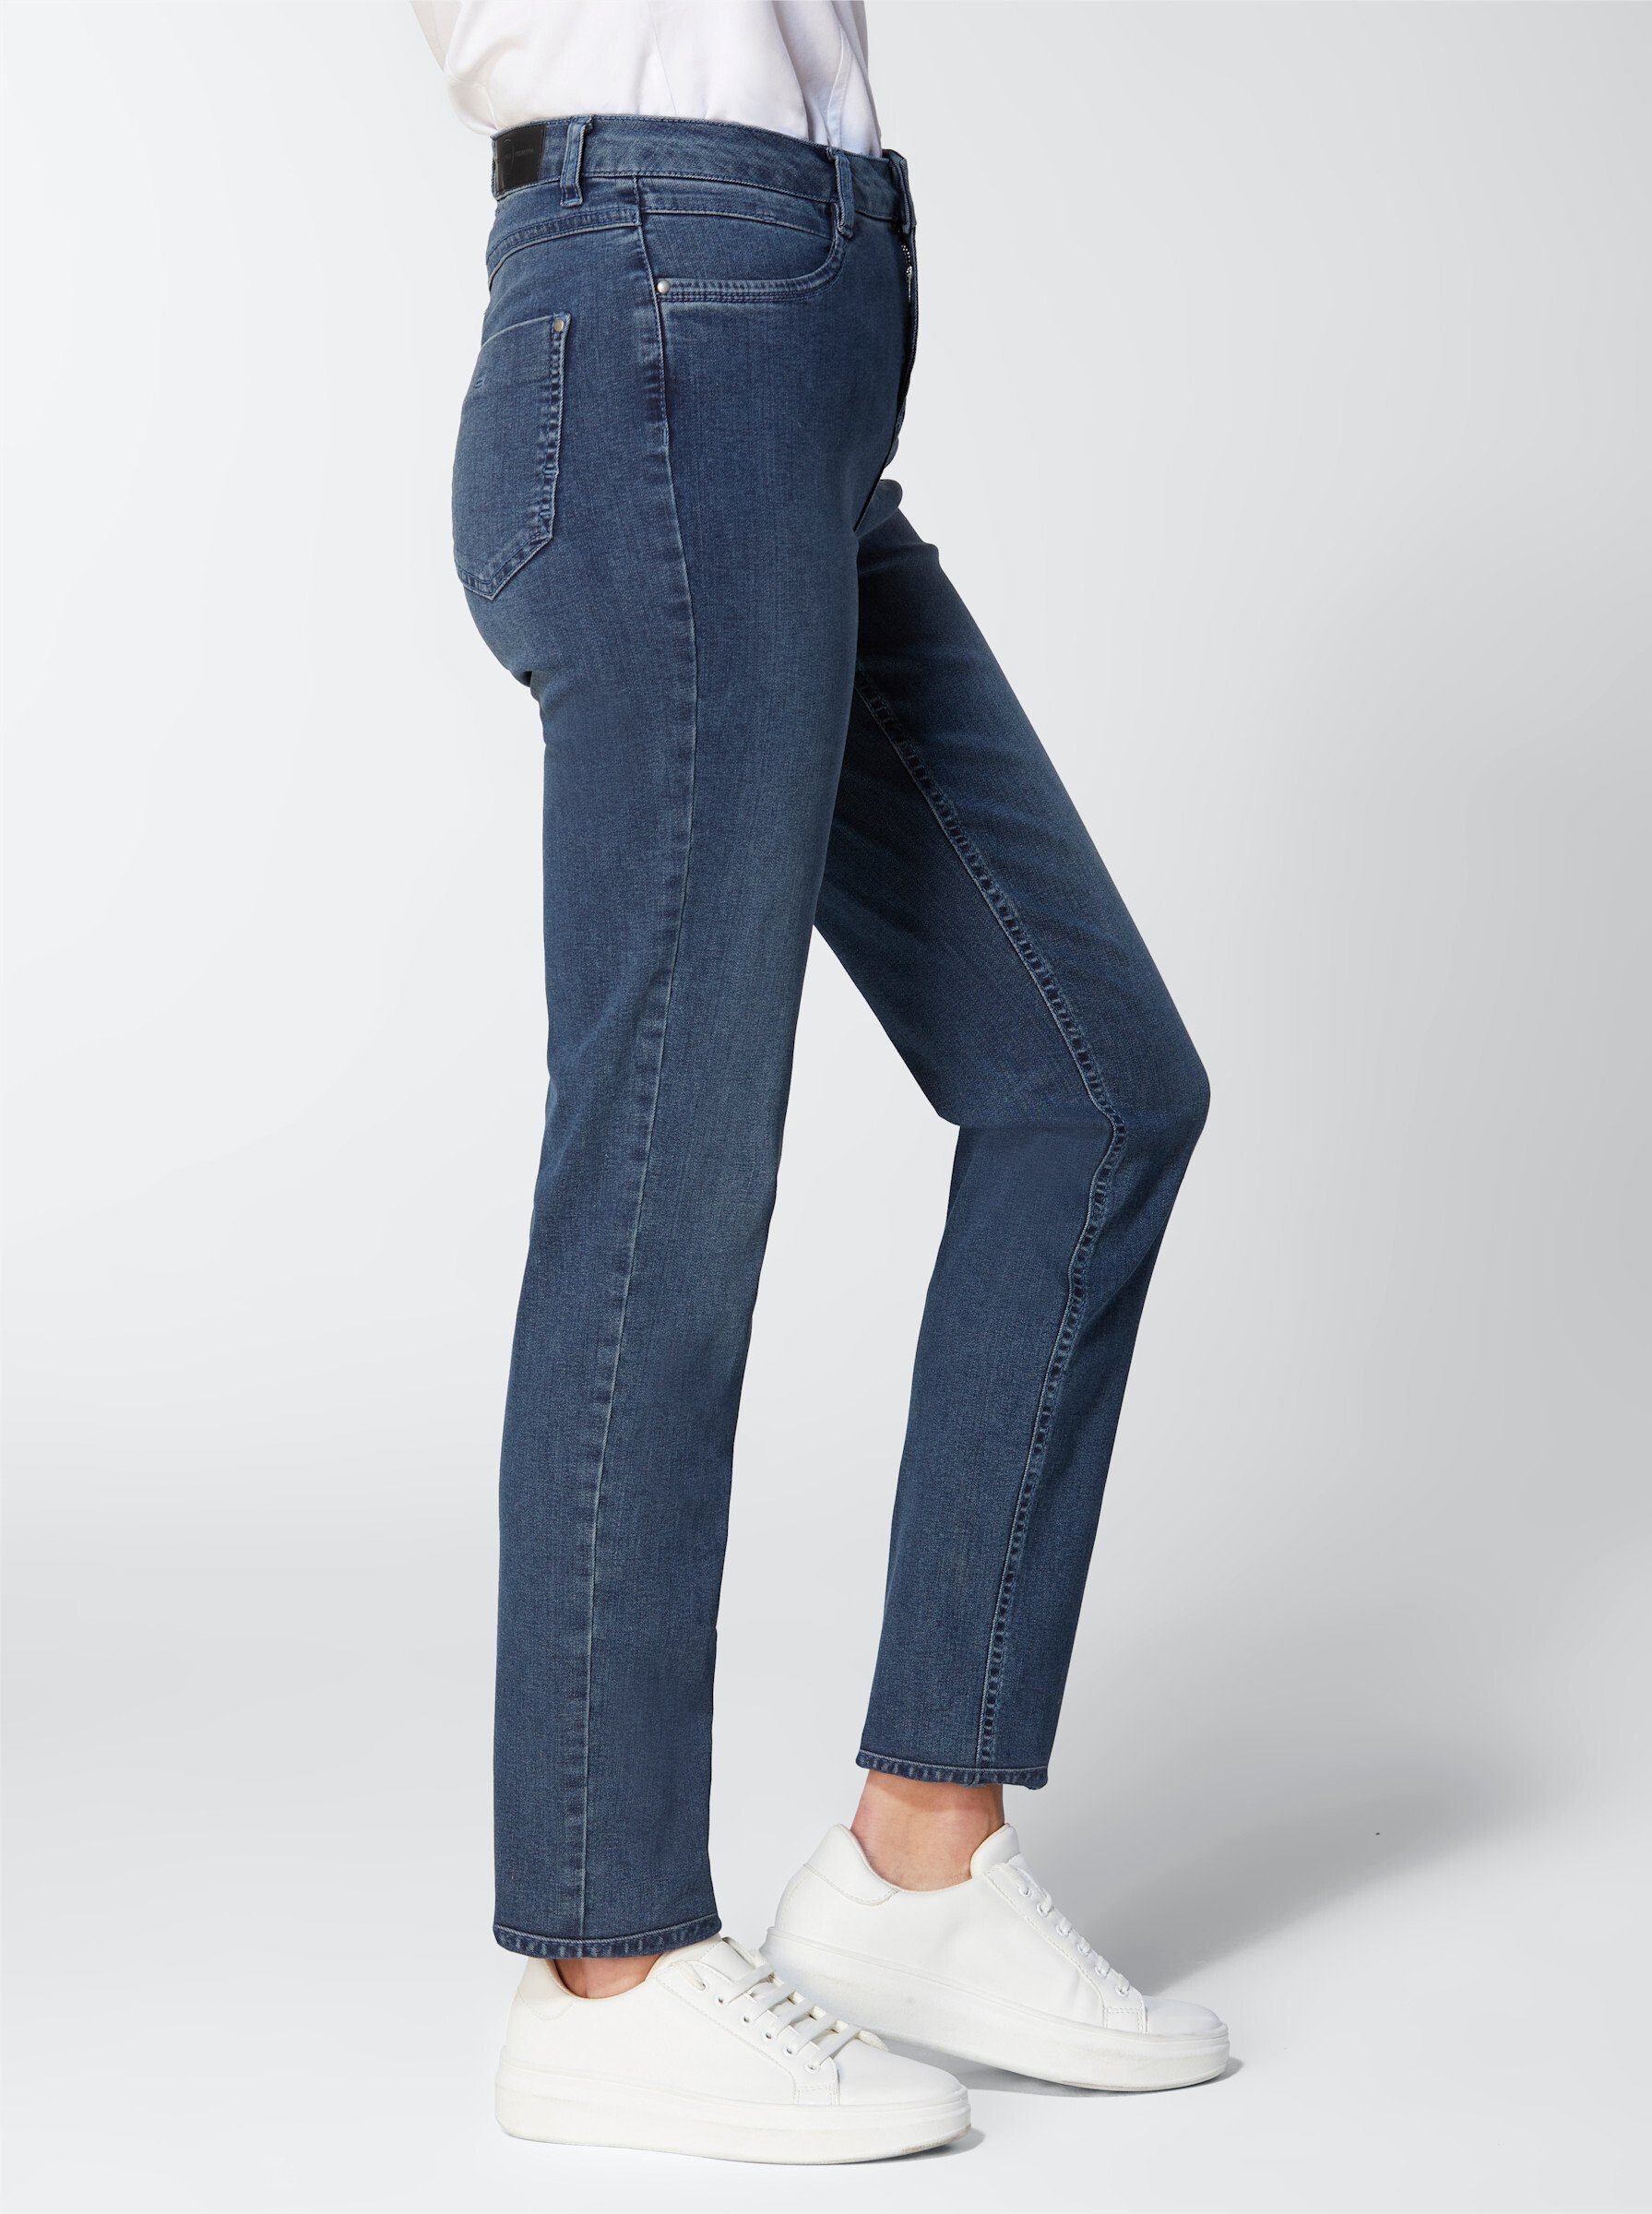 L blue-stone-washed Bequeme creation Jeans